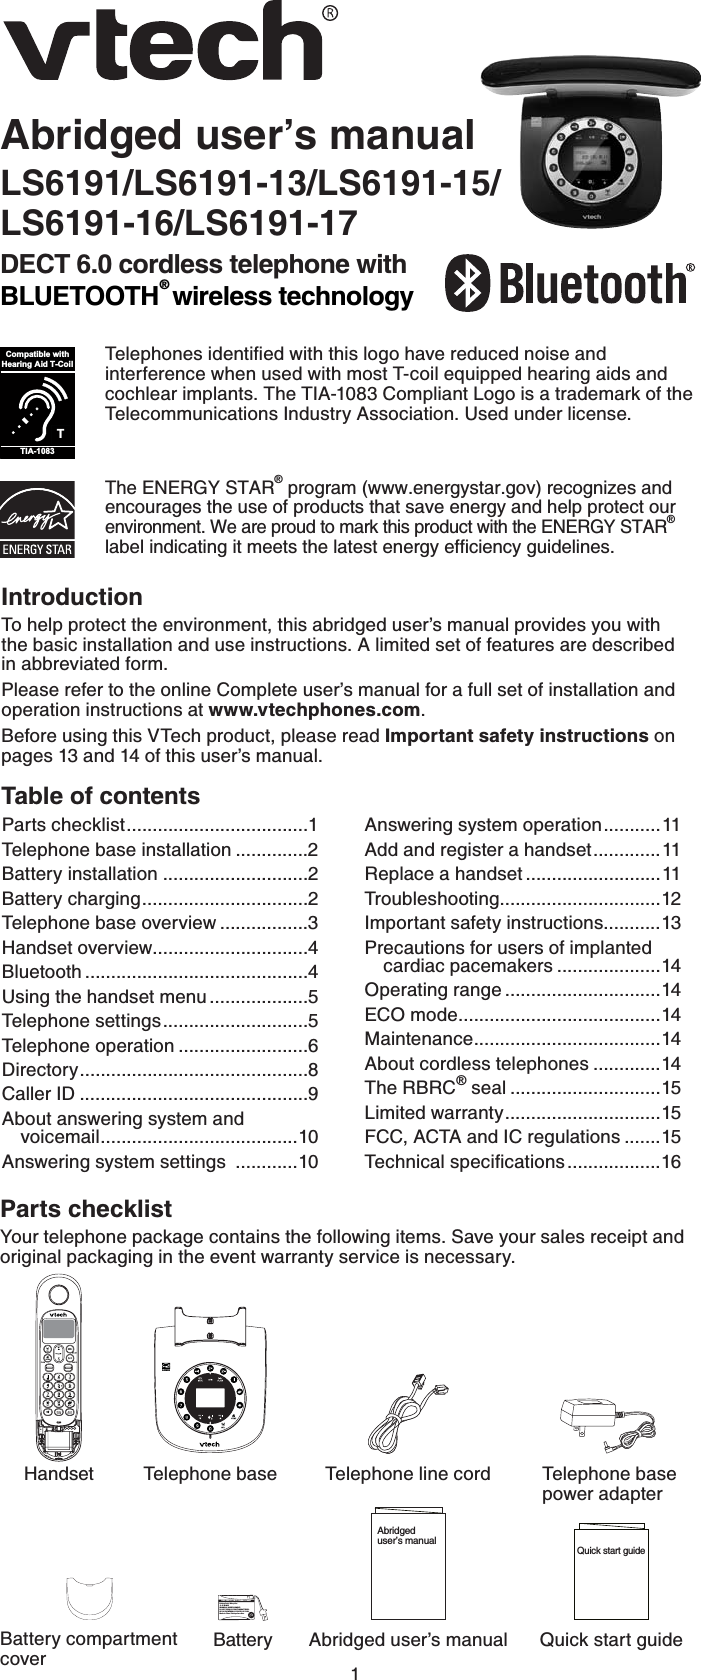 1Abridged user’s manualLS6191/LS6191-13/LS6191-15/LS6191-16/LS6191-17DECT 6.0 cordless telephone with BLUETOOTH® wireless technologyThe ENERGY STAR® program (www.energystar.gov) recognizes and encourages the use of products that save energy and help protect our environment. We are proud to mark this product with the ENERGY STAR®NCDGNKPFKECVKPIKVOGGVUVJGNCVGUVGPGTI[GHſEKGPE[IWKFGNKPGU6GNGRJQPGUKFGPVKſGFYKVJVJKUNQIQJCXGTGFWEGFPQKUGCPFinterference when used with most T-coil equipped hearing aids and cochlear implants. The TIA-1083 Compliant Logo is a trademark of the Telecommunications Industry Association. Used under license.TCompatible withHearing Aid T-CoilTIA-1083IntroductionTo help protect the environment, this abridged user’s manual provides you with  the basic installation and use instructions. A limited set of features are described  in abbreviated form.Please refer to the online Complete user’s manual for a full set of installation and operation instructions at www.vtechphones.com.Before using this VTech product, please read Important safety instructions on pages 13 and 14 of this user’s manual.Table of contentsParts checklistYour telephone package contains the following items. Save your sales receipt and original packaging in the event warranty service is necessary.Parts checklist...................................1Telephone base installation ..............2Battery installation ............................2Battery charging................................2Telephone base overview .................3Handset overview..............................4Bluetooth ...........................................4Using the handset menu ...................5Telephone settings............................5Telephone operation .........................6Directory............................................8Caller ID ............................................9About answering system and   voicemail......................................10Answering system settings  ............10Answering system operation...........11Add and register a handset.............11Replace a handset ..........................11Troubleshooting...............................12Important safety instructions...........13Precautions for users of implanted cardiac pacemakers ....................14Operating range ..............................14ECO mode.......................................14Maintenance....................................14About cordless telephones .............14The RBRC® seal .............................15Limited warranty..............................15FCC, ACTA and IC regulations .......156GEJPKECNURGEKſECVKQPU..................16Abridged user’s manual Quick start guideTelephone line cordBatteryTelephone base                     power adapterBattery compartment coverHandset Telephone baseAbridged user’s manualQuick start guideBatteryPack / Bloc-piles : (2.4V Ni-MH)WARNING / AVERTISSEMENT:DO NOT BURN OR PUNCTURE BATTERIES.NEPAS INCINÉRER OU PERCER LES PILES.Made in China /Fabriqué en chineTHISSIDE UP / CE CÔTÉVERS LE HAUT